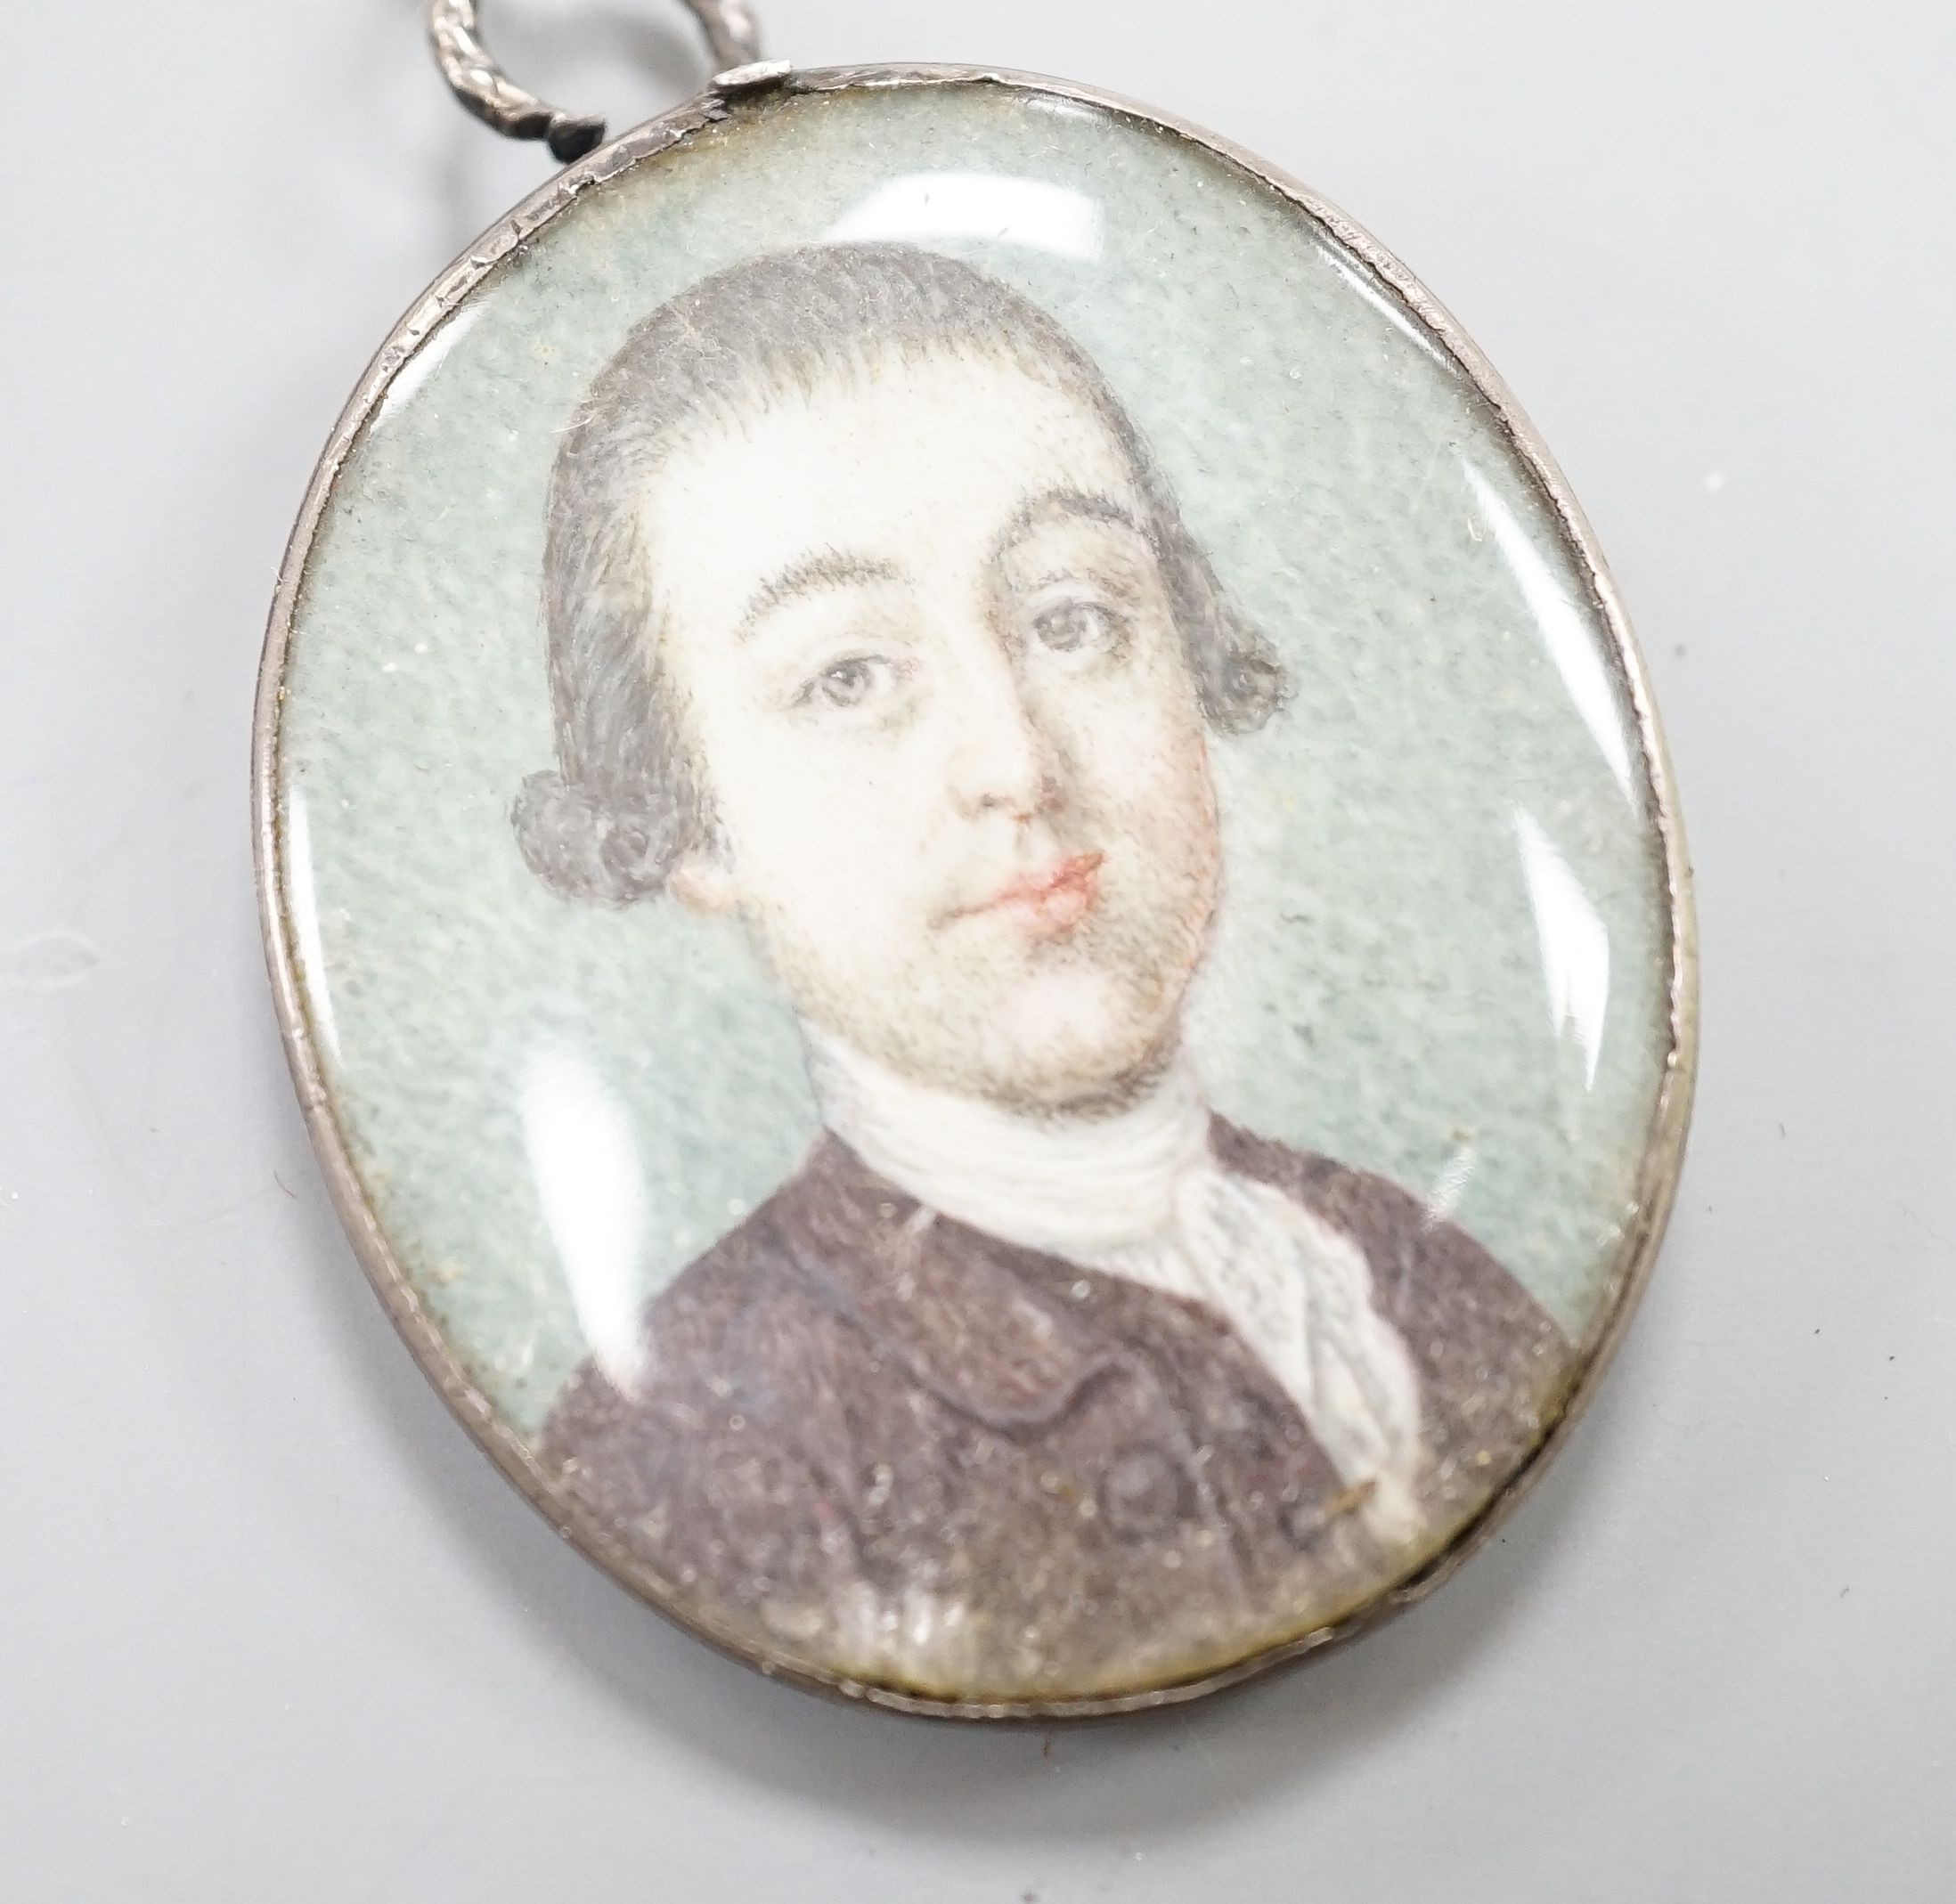 Late 18th century English School, oil on ivory, Miniature portrait of a gentleman in a brown coat 3.5x3cm